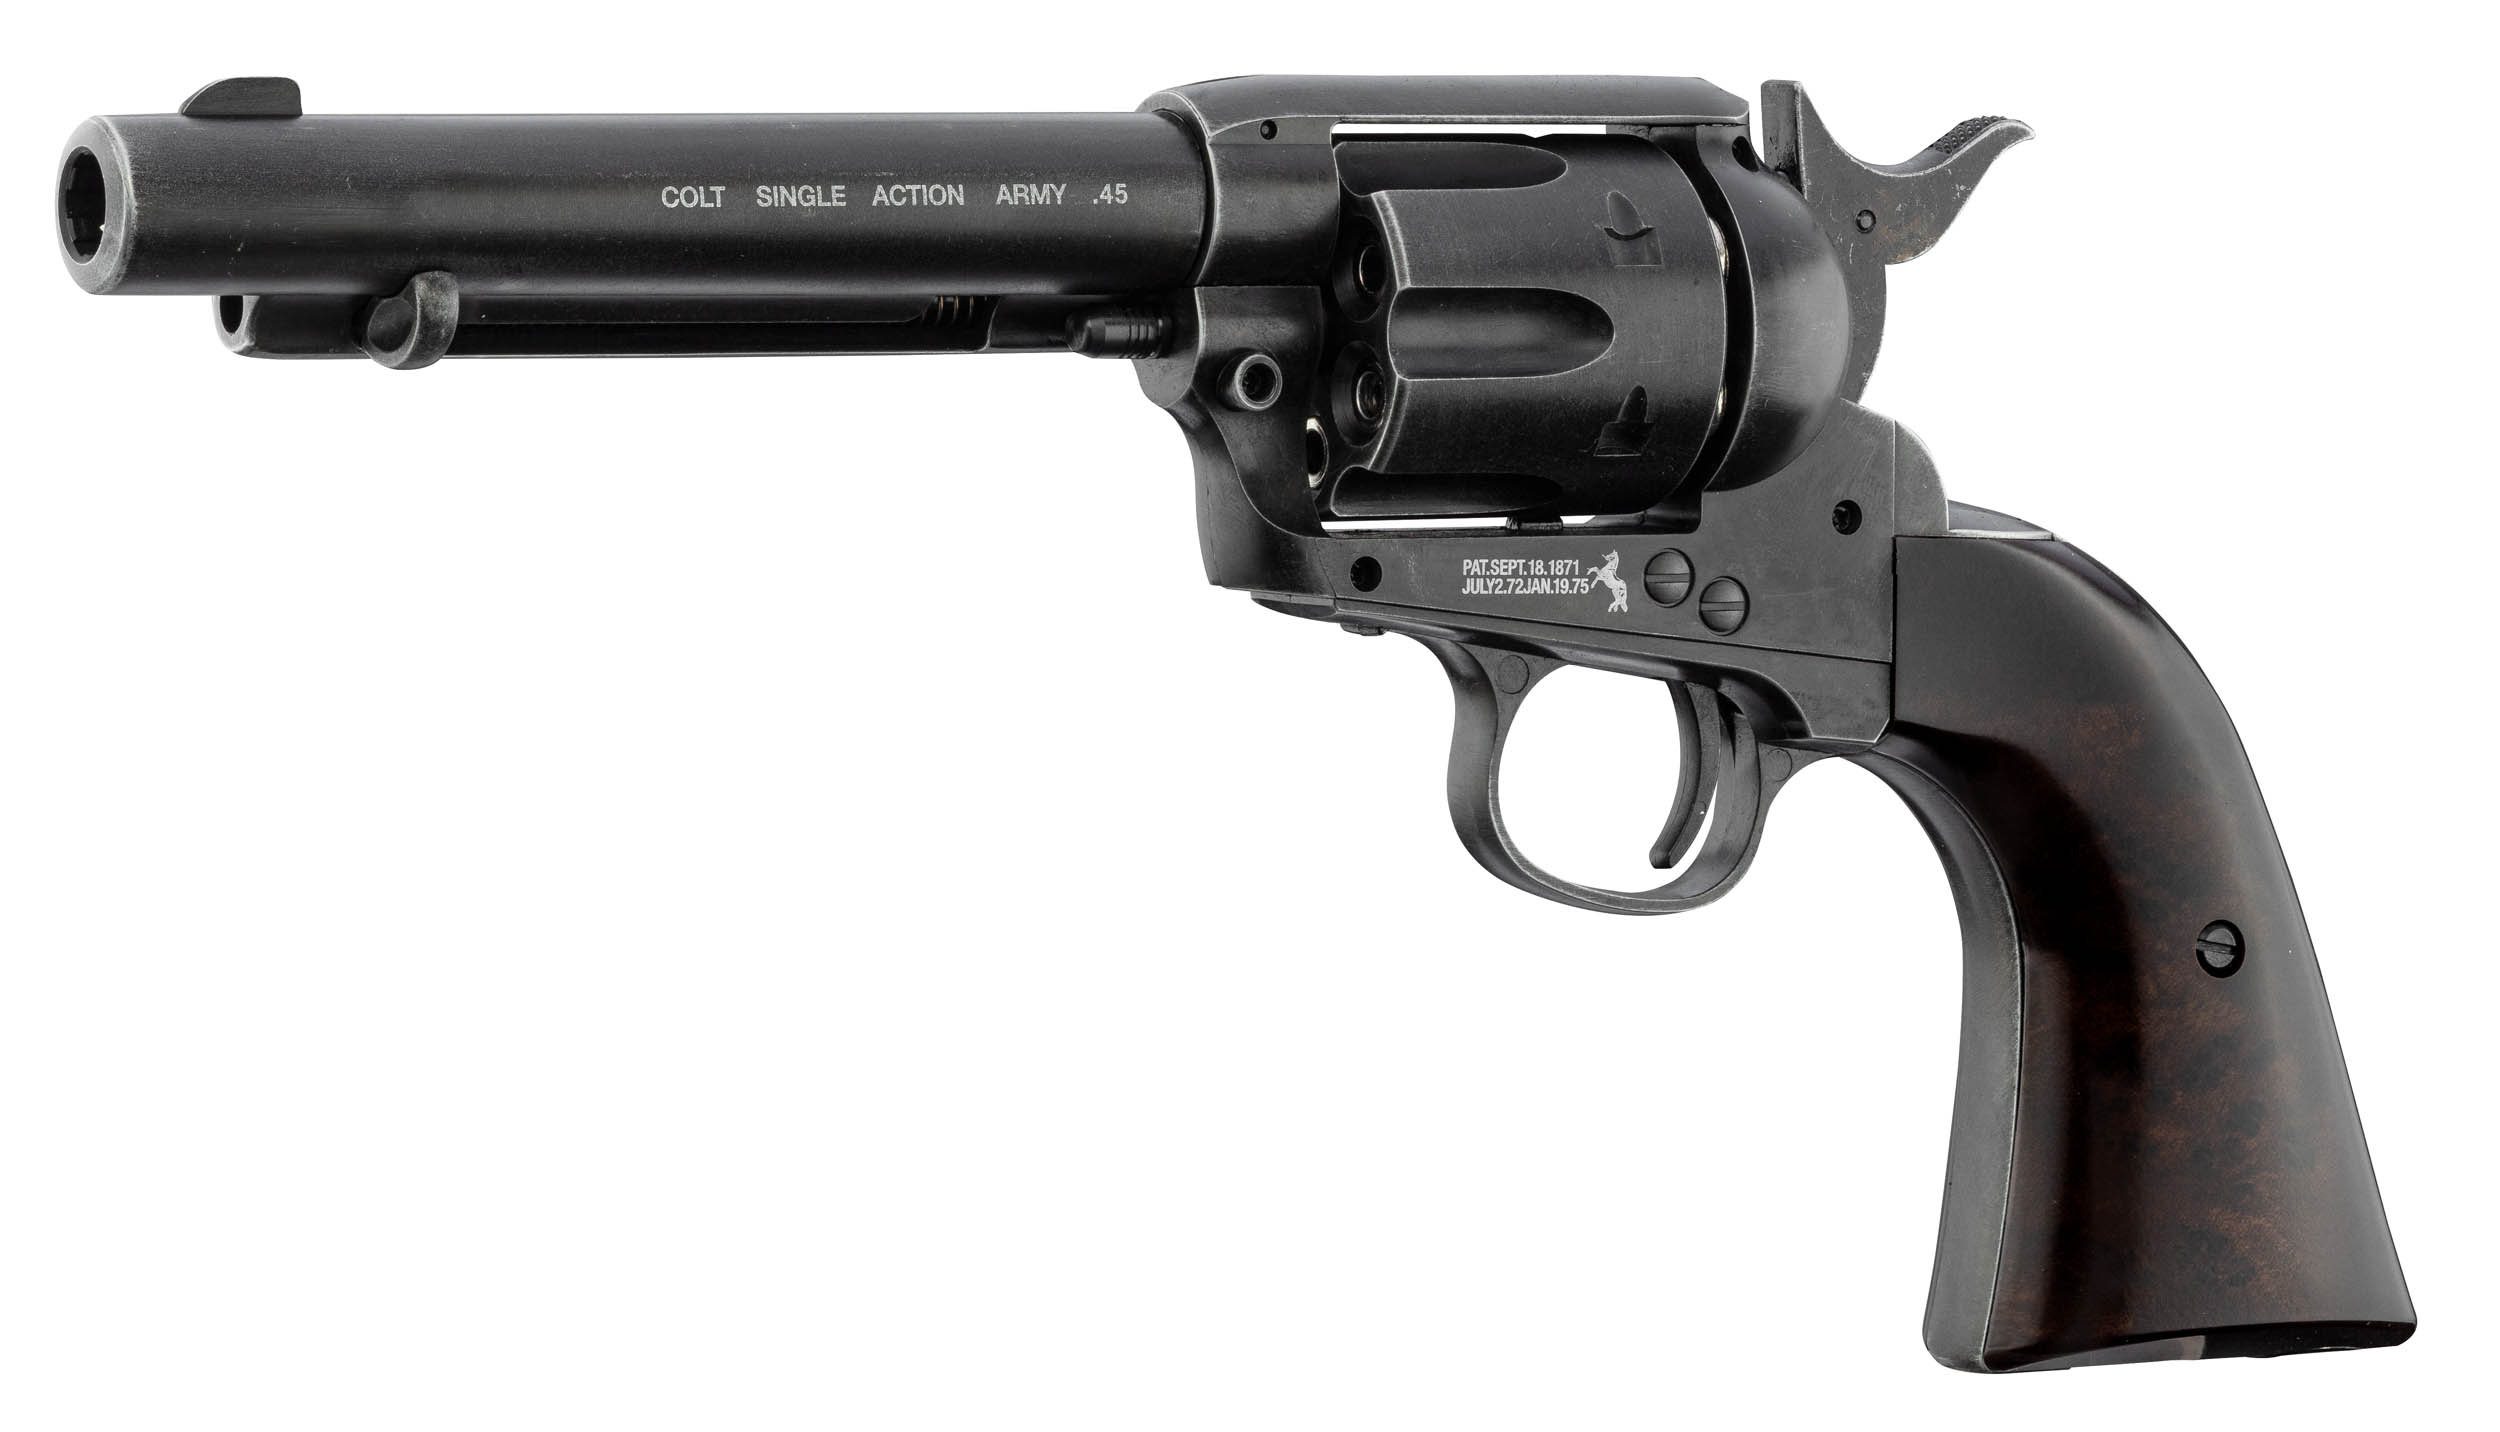 ACR245-01 Colt Simple Action Army 45 CO2 revolver with diabolos cal. 4.5 mm - ACR245